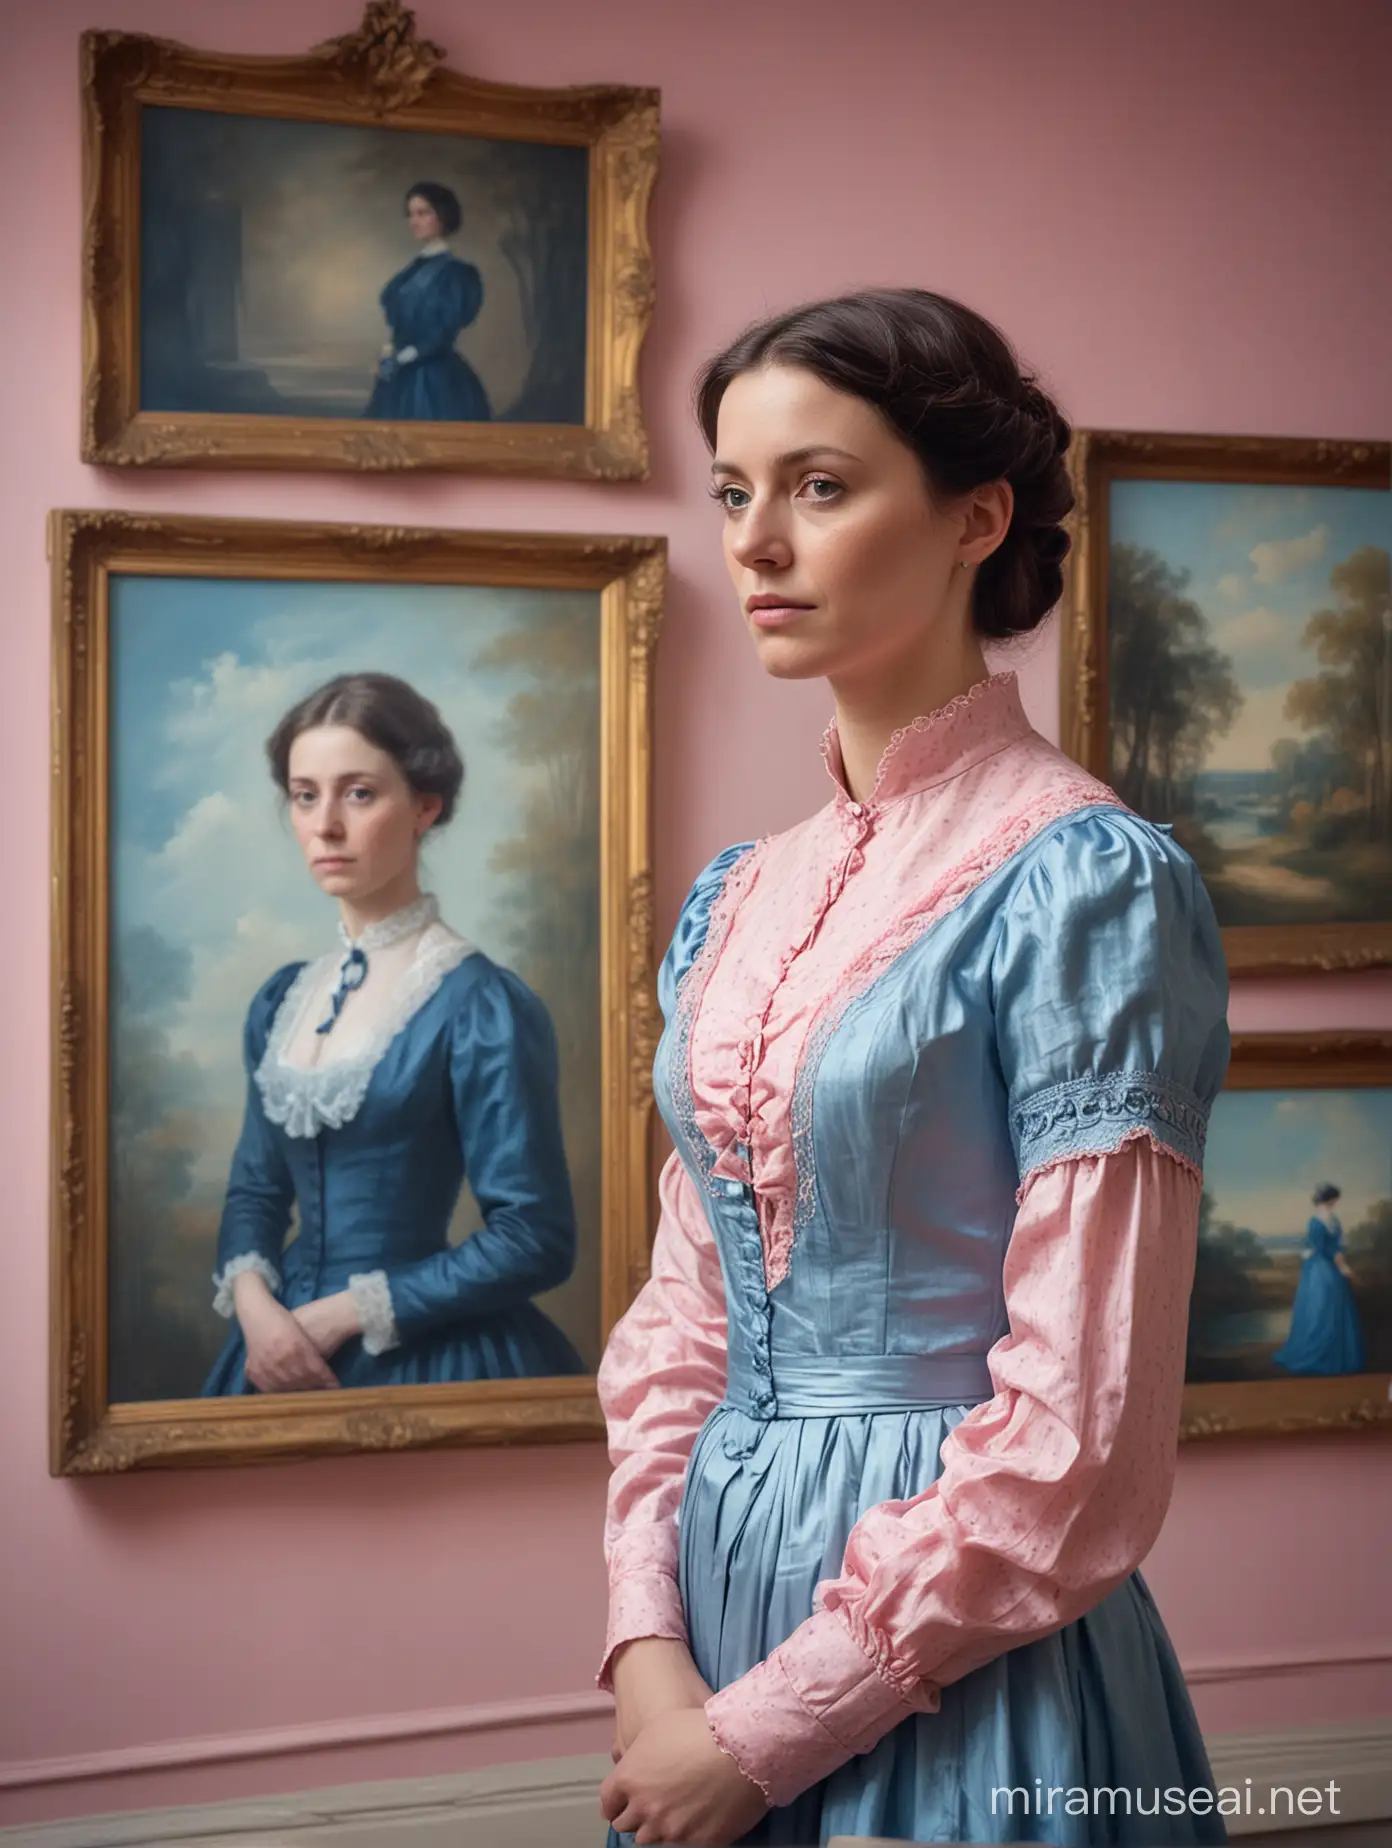 
A 35-year-old woman in Victorian dress looking sadly in front of her own painting at an art exhibition.
Blue and pink tones dominate the picture.